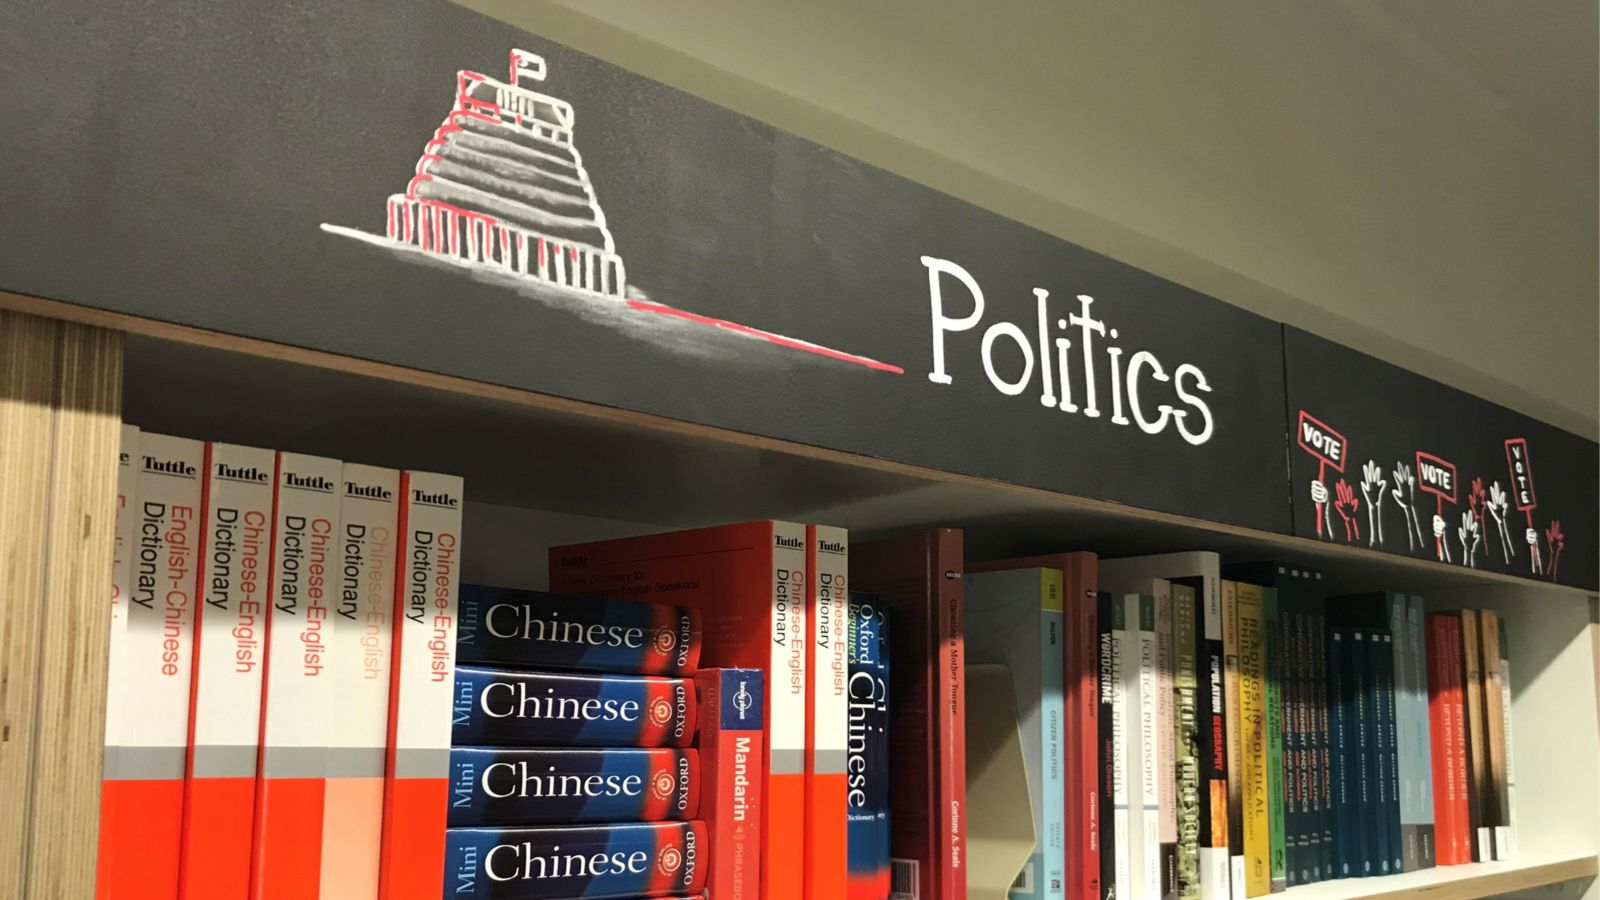 Bookshelf with Chinese—English dictionaries and various other books under a sign that says 'Politics'.